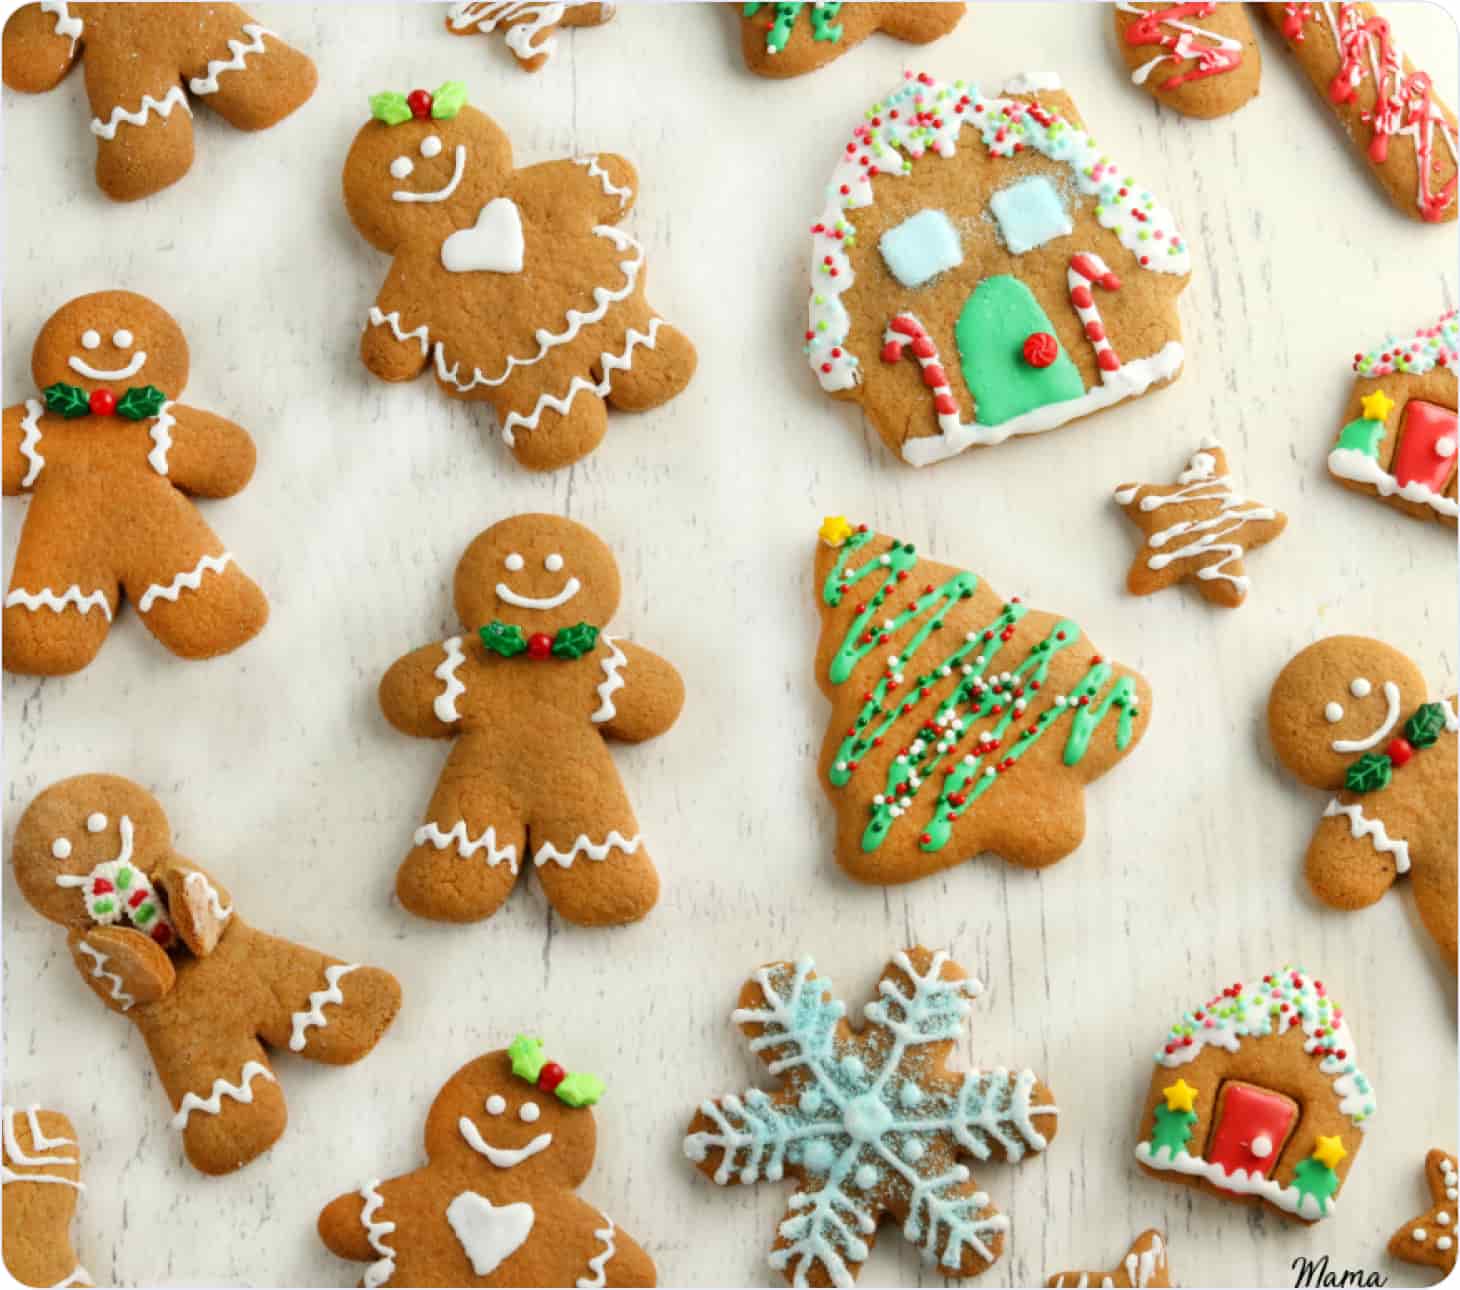 Decorated gluten free Christmas cookies